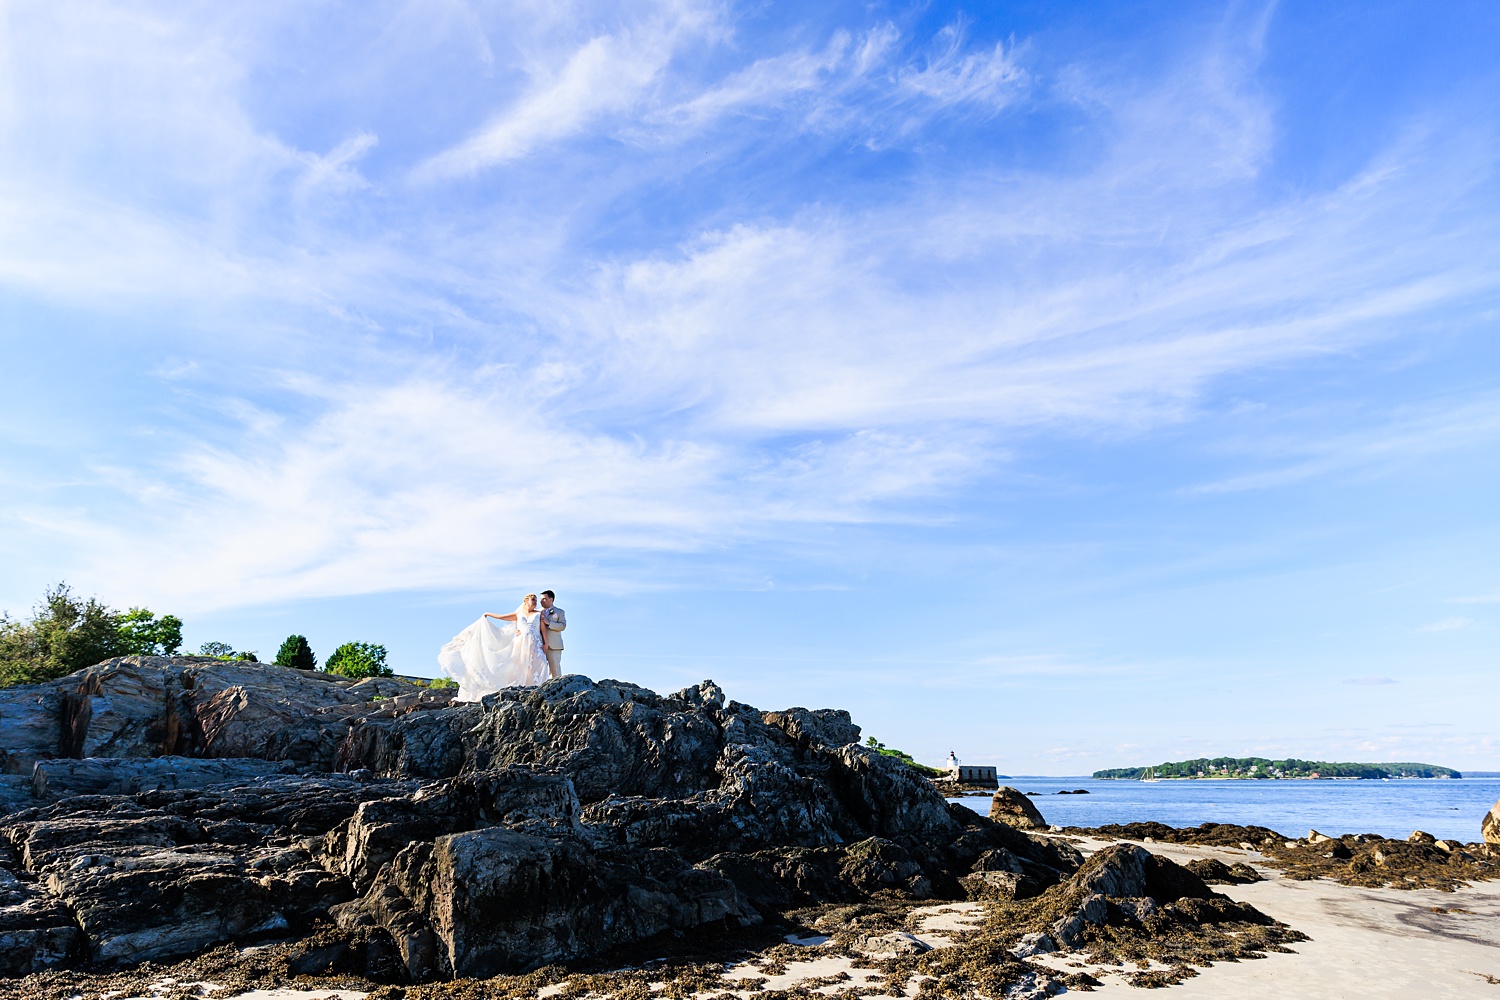 The bride and groom climb the rocks at Willard Beach in South Portland Maine